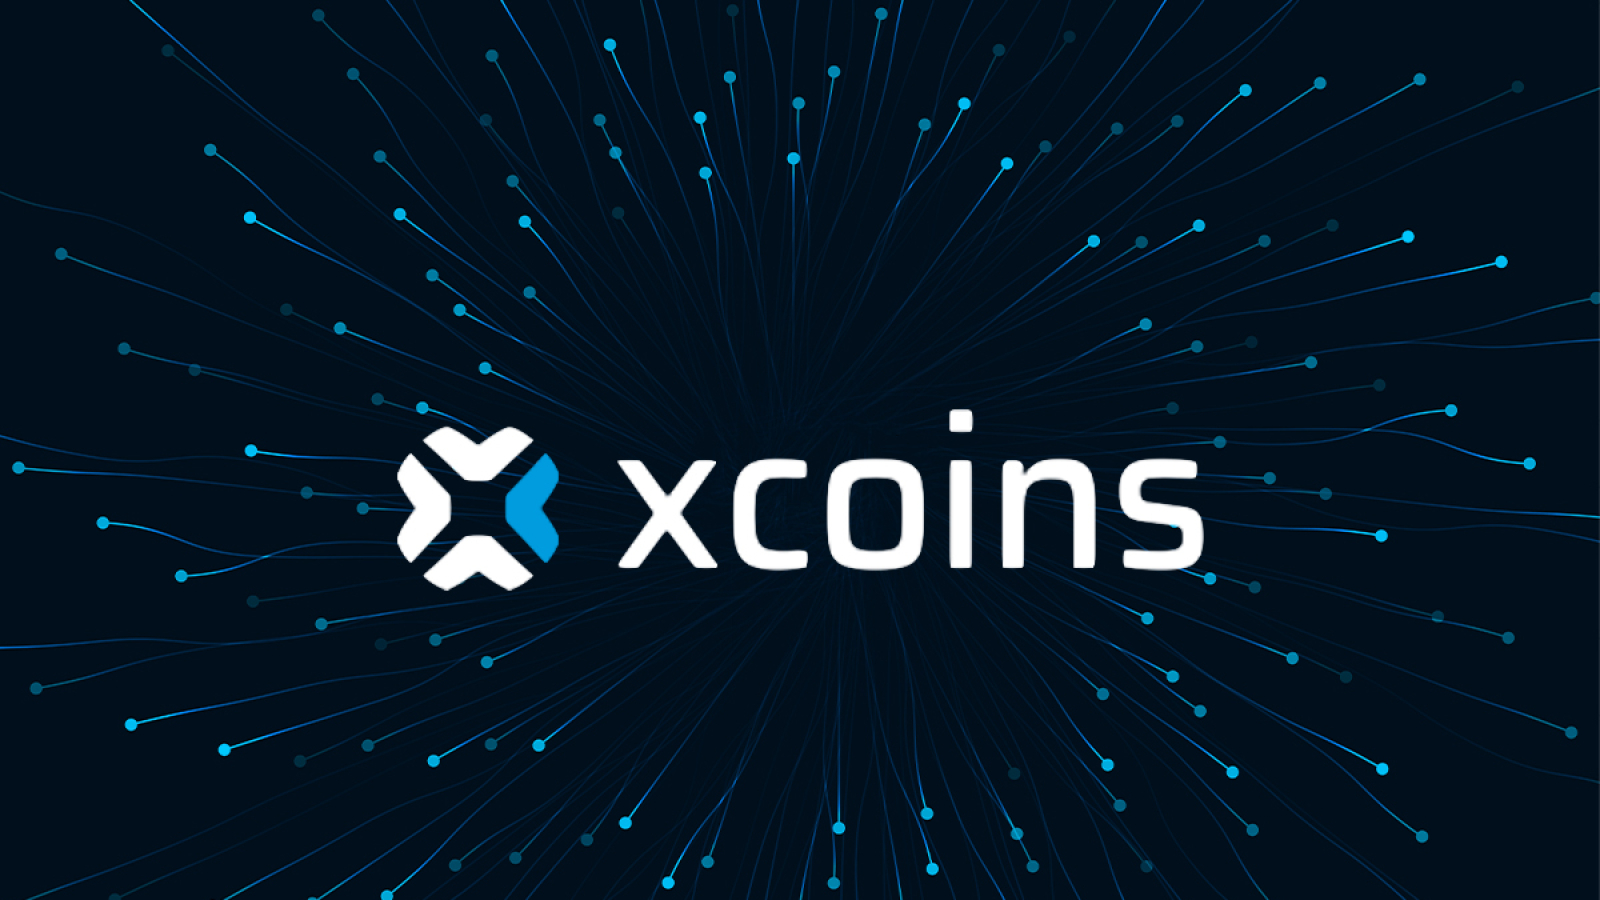 Xcoins Reduces Card Processing Fees